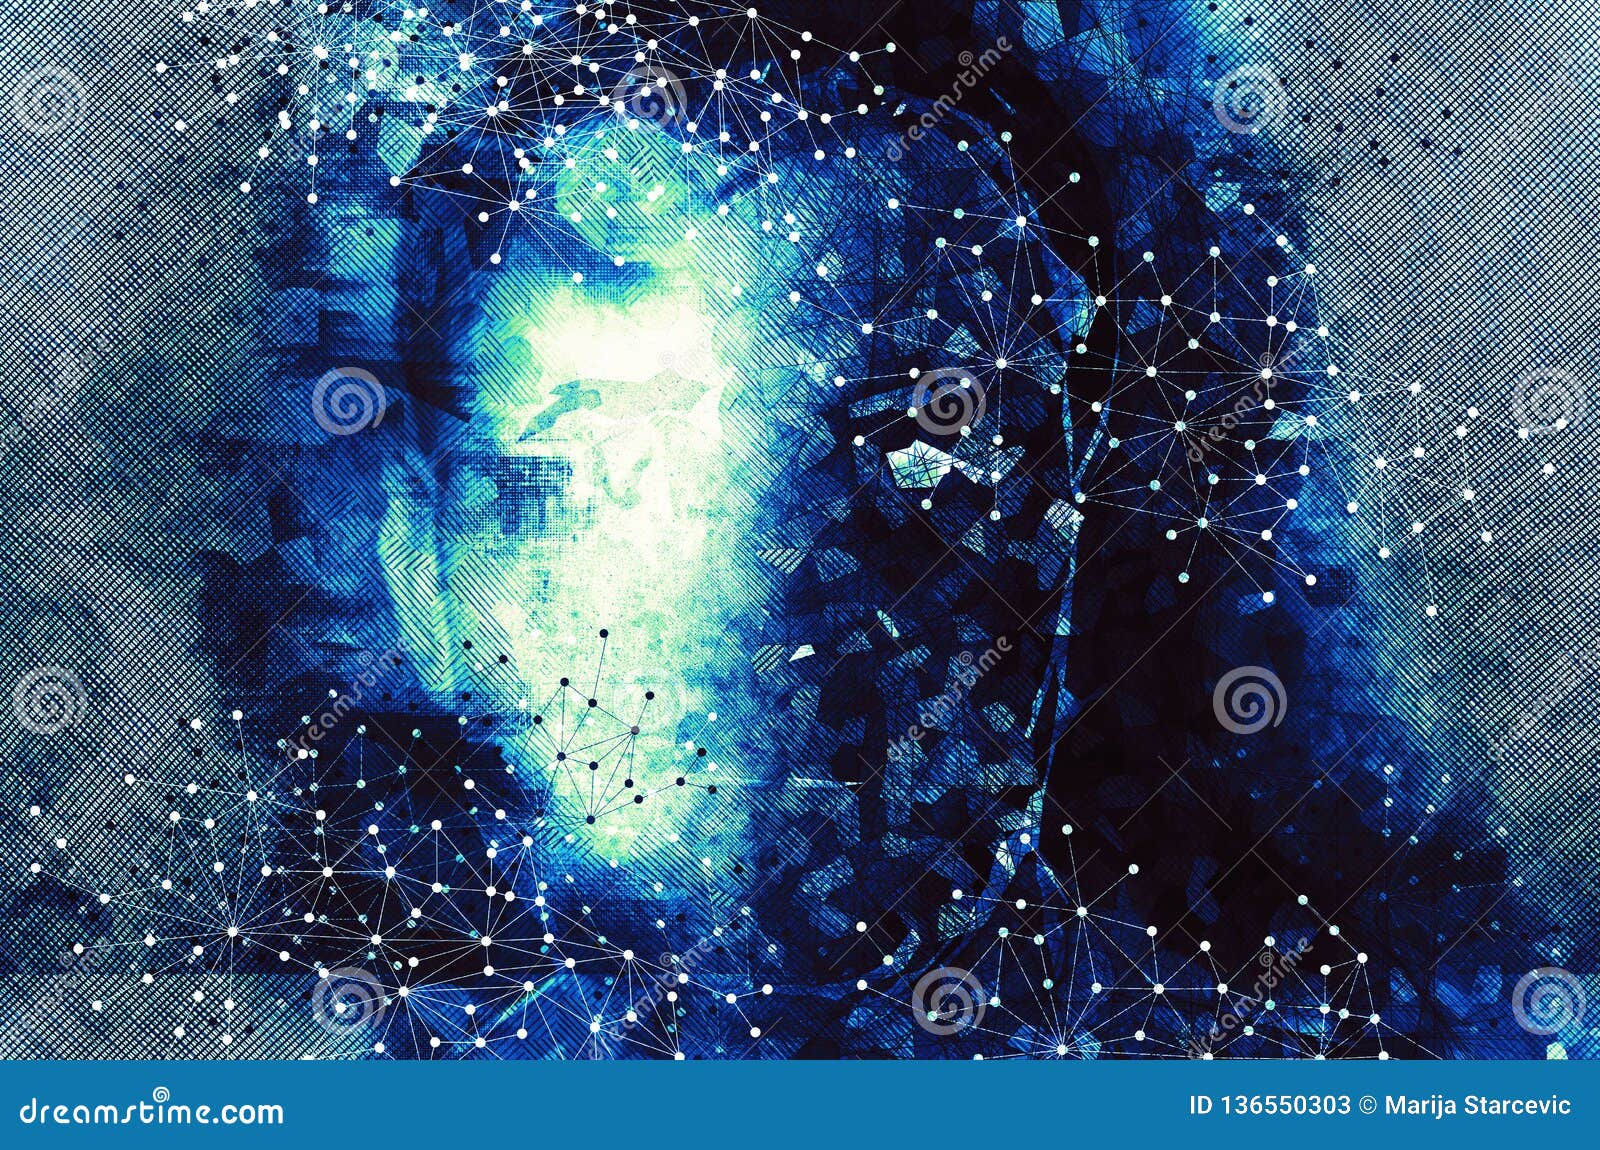 portrait of a man with polygonal s , ciborg look - artificial intelligence and mind concept